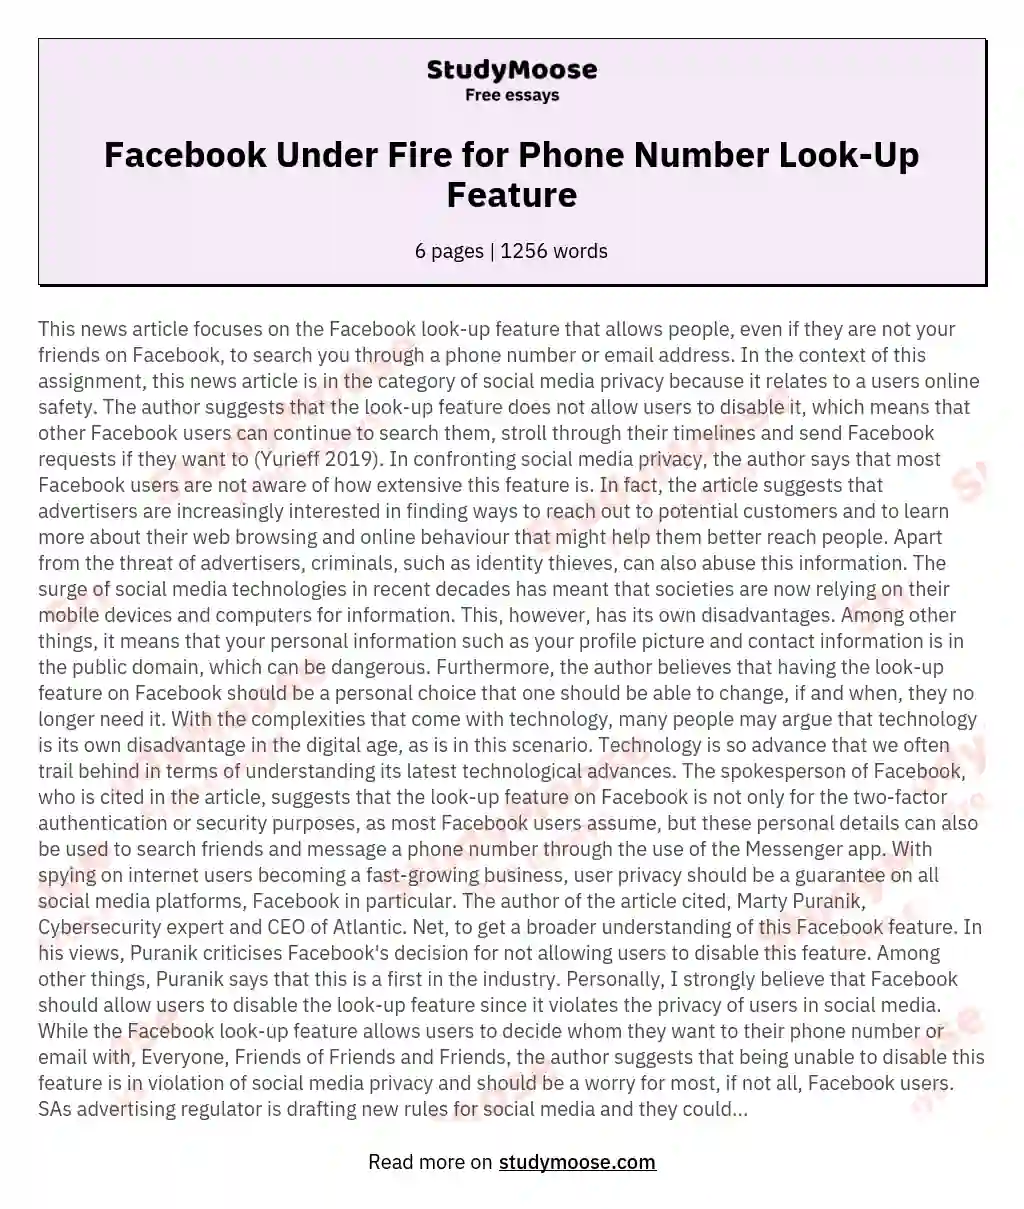 Facebook Under Fire for Phone Number Look-Up Feature essay